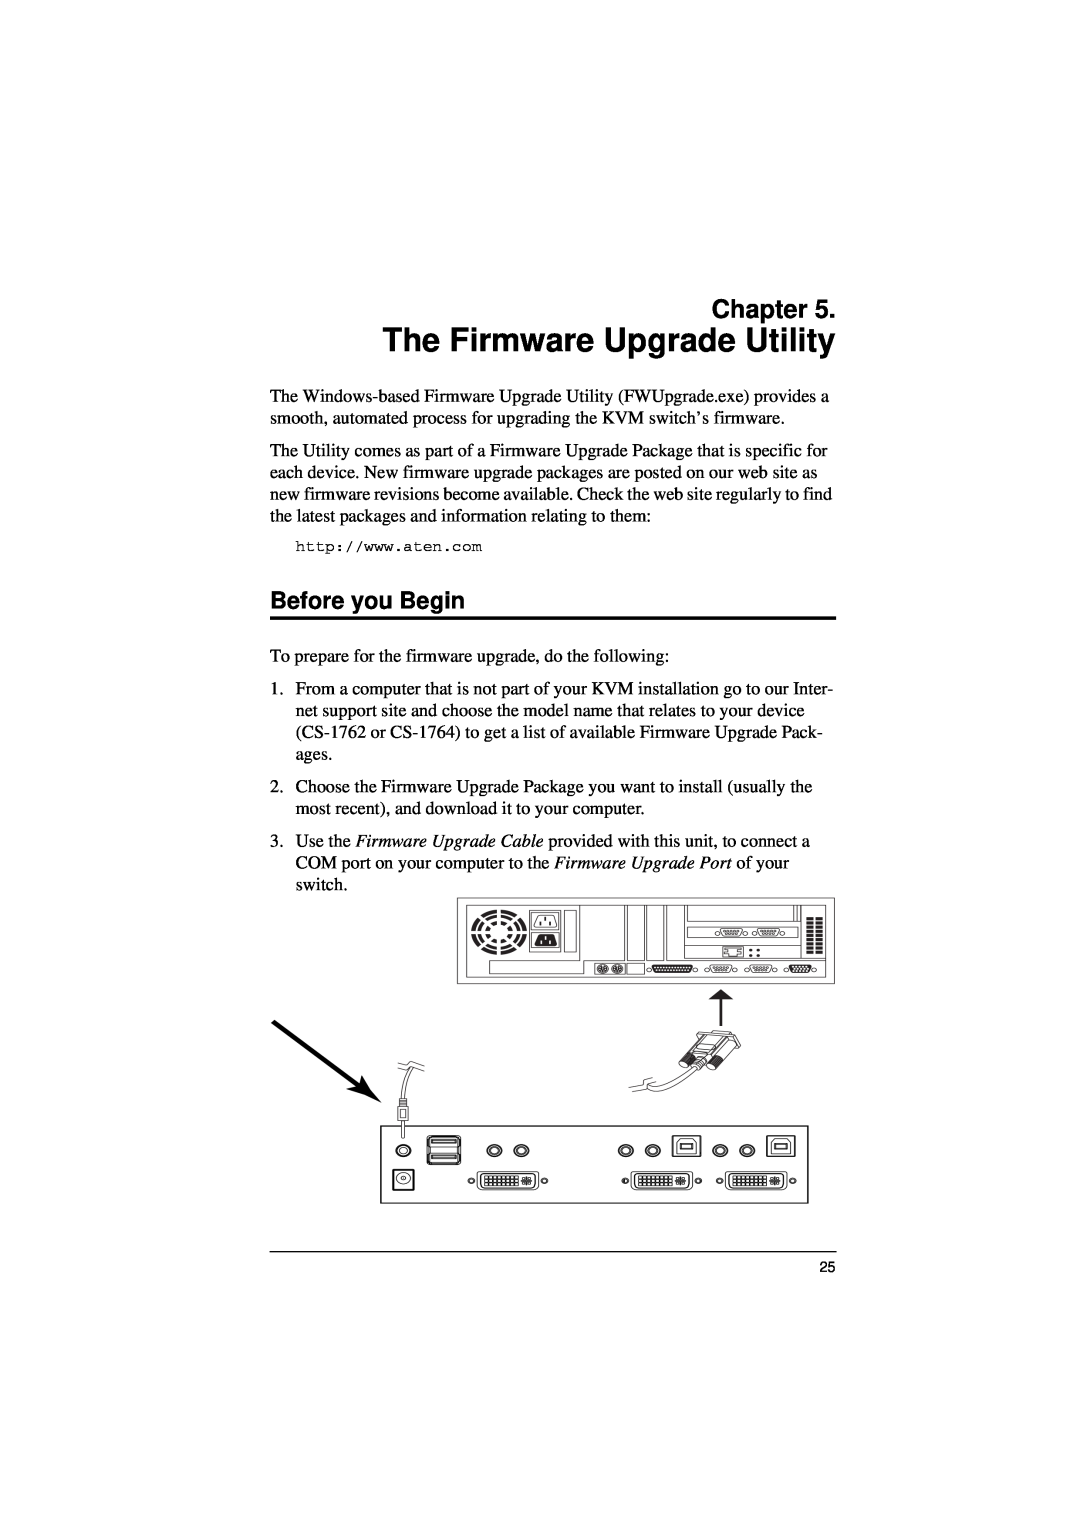 ATEN Technology CS-1762, CS-1764 user manual The Firmware Upgrade Utility, Chapter, Before you Begin 